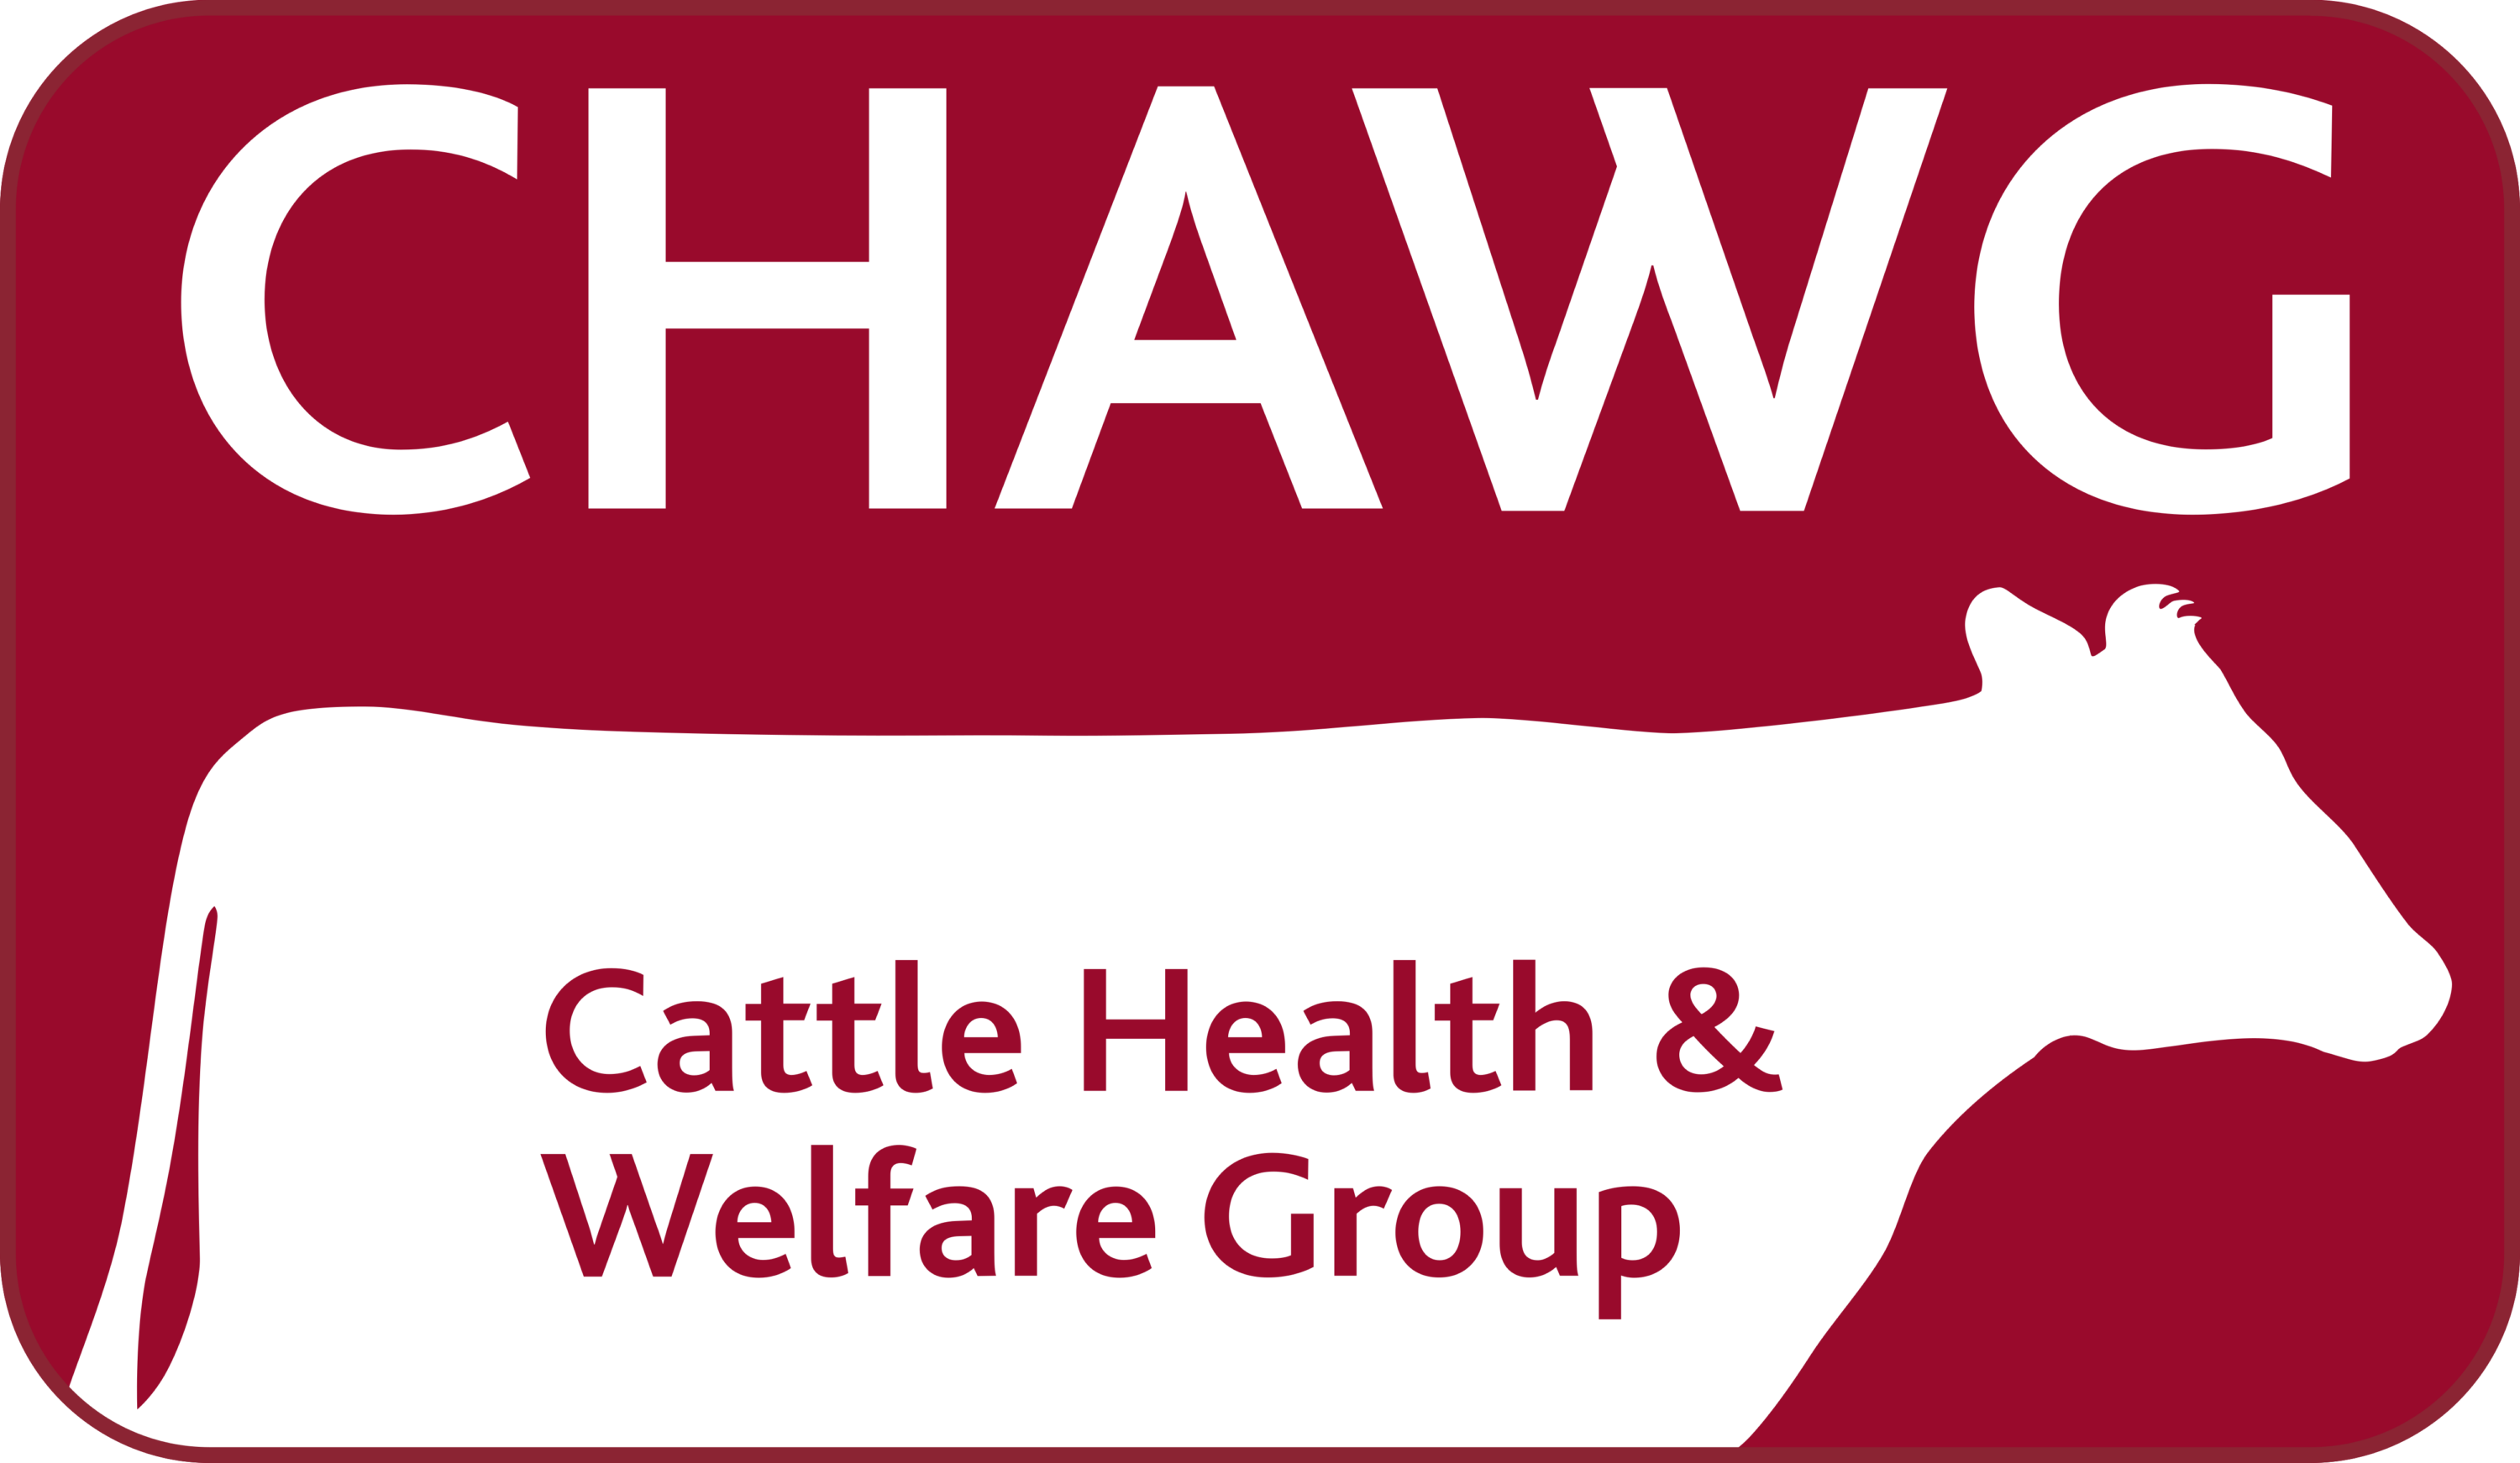 The Cattle Health & Welfare Group (CHAWG) Logo